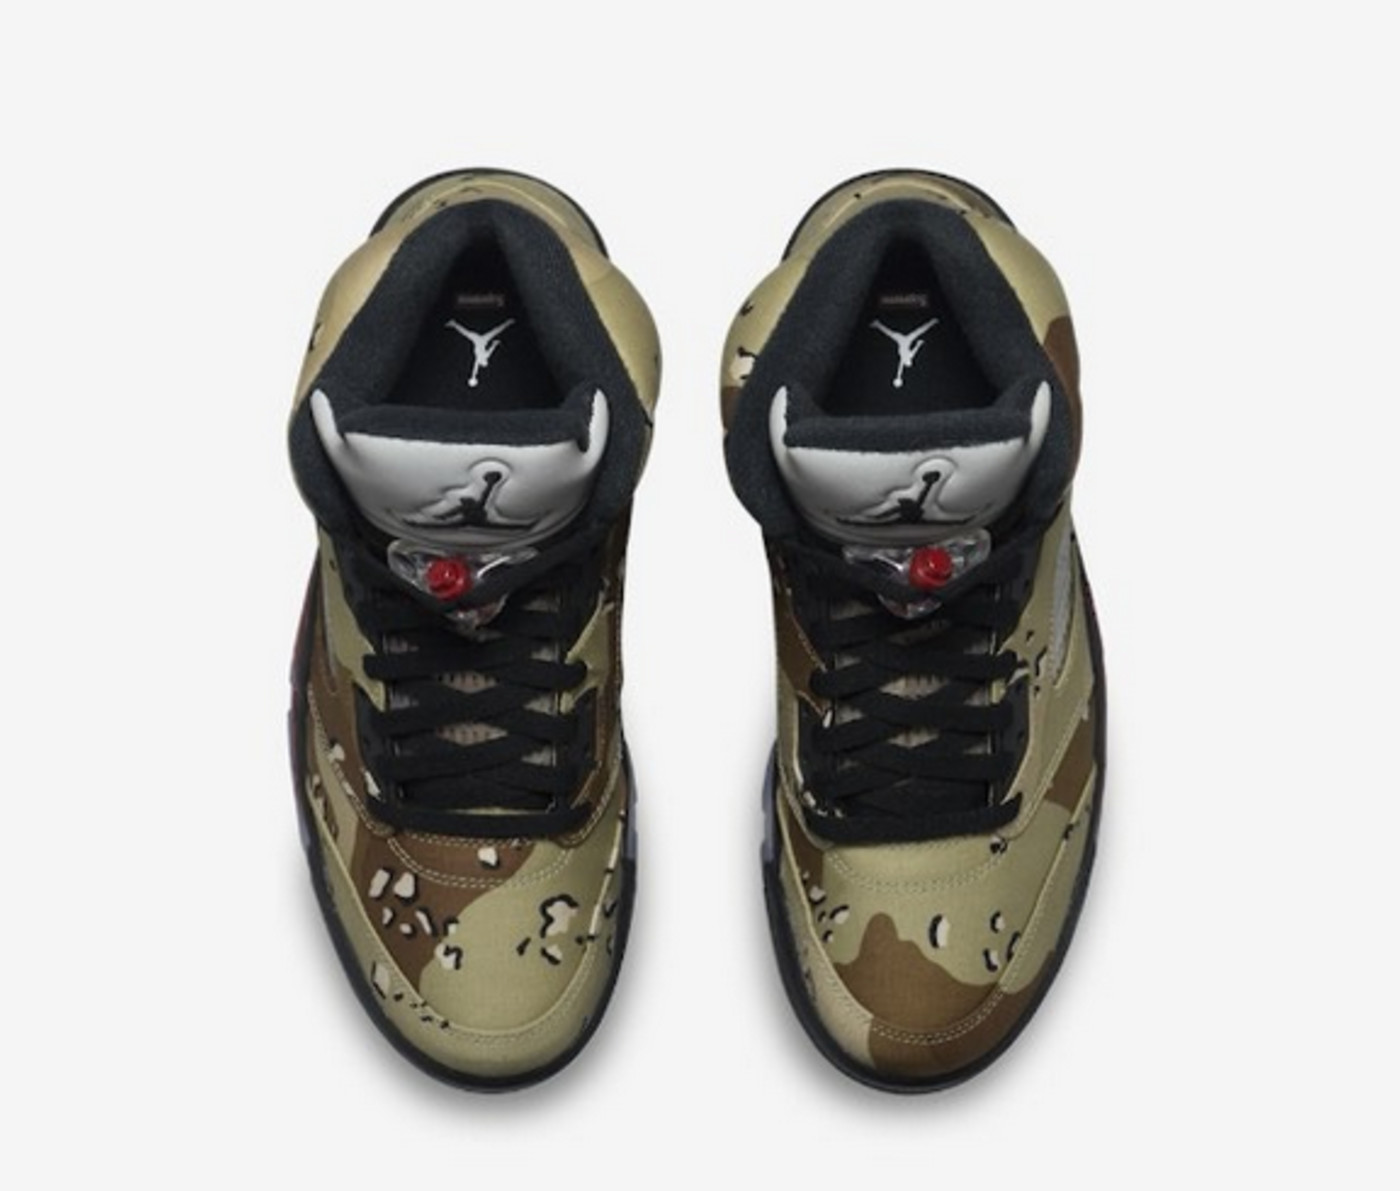 The Camo Supreme Vs Are The Only Colorway Dropping on NikeLab | Complex